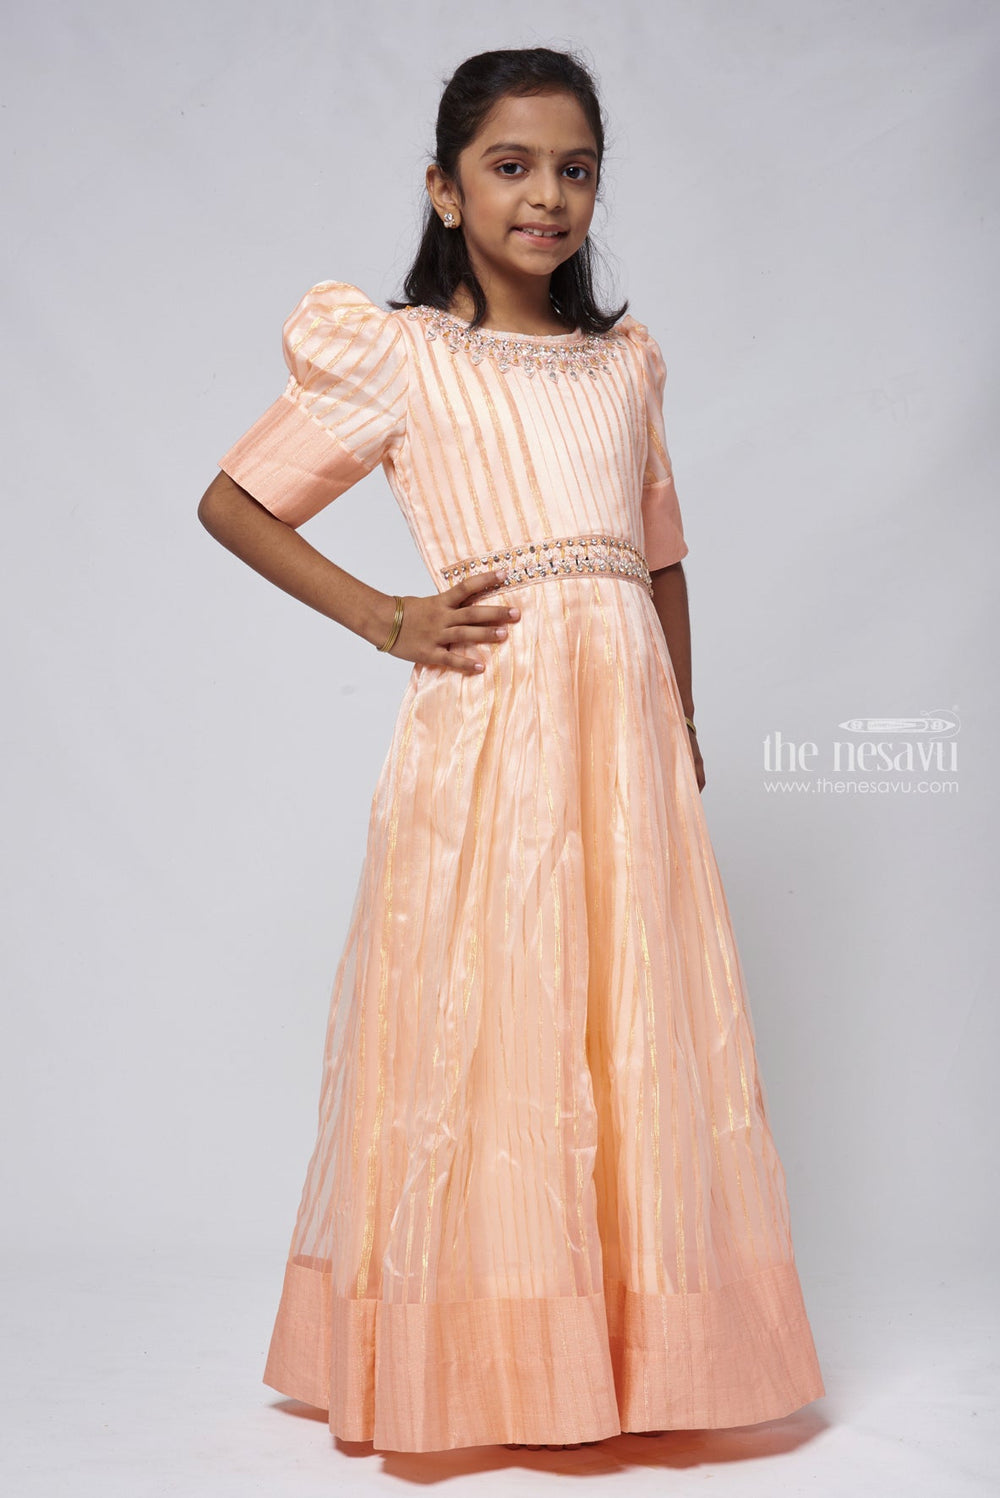 The Nesavu Party Gown Peach Organza Party Wear Gown Dress with Faux Mirror Embellished Hip Band Nesavu Peach Organza Party Wear Gown Dress with Faux Mirror Embellished Hip Band | The Nesavu